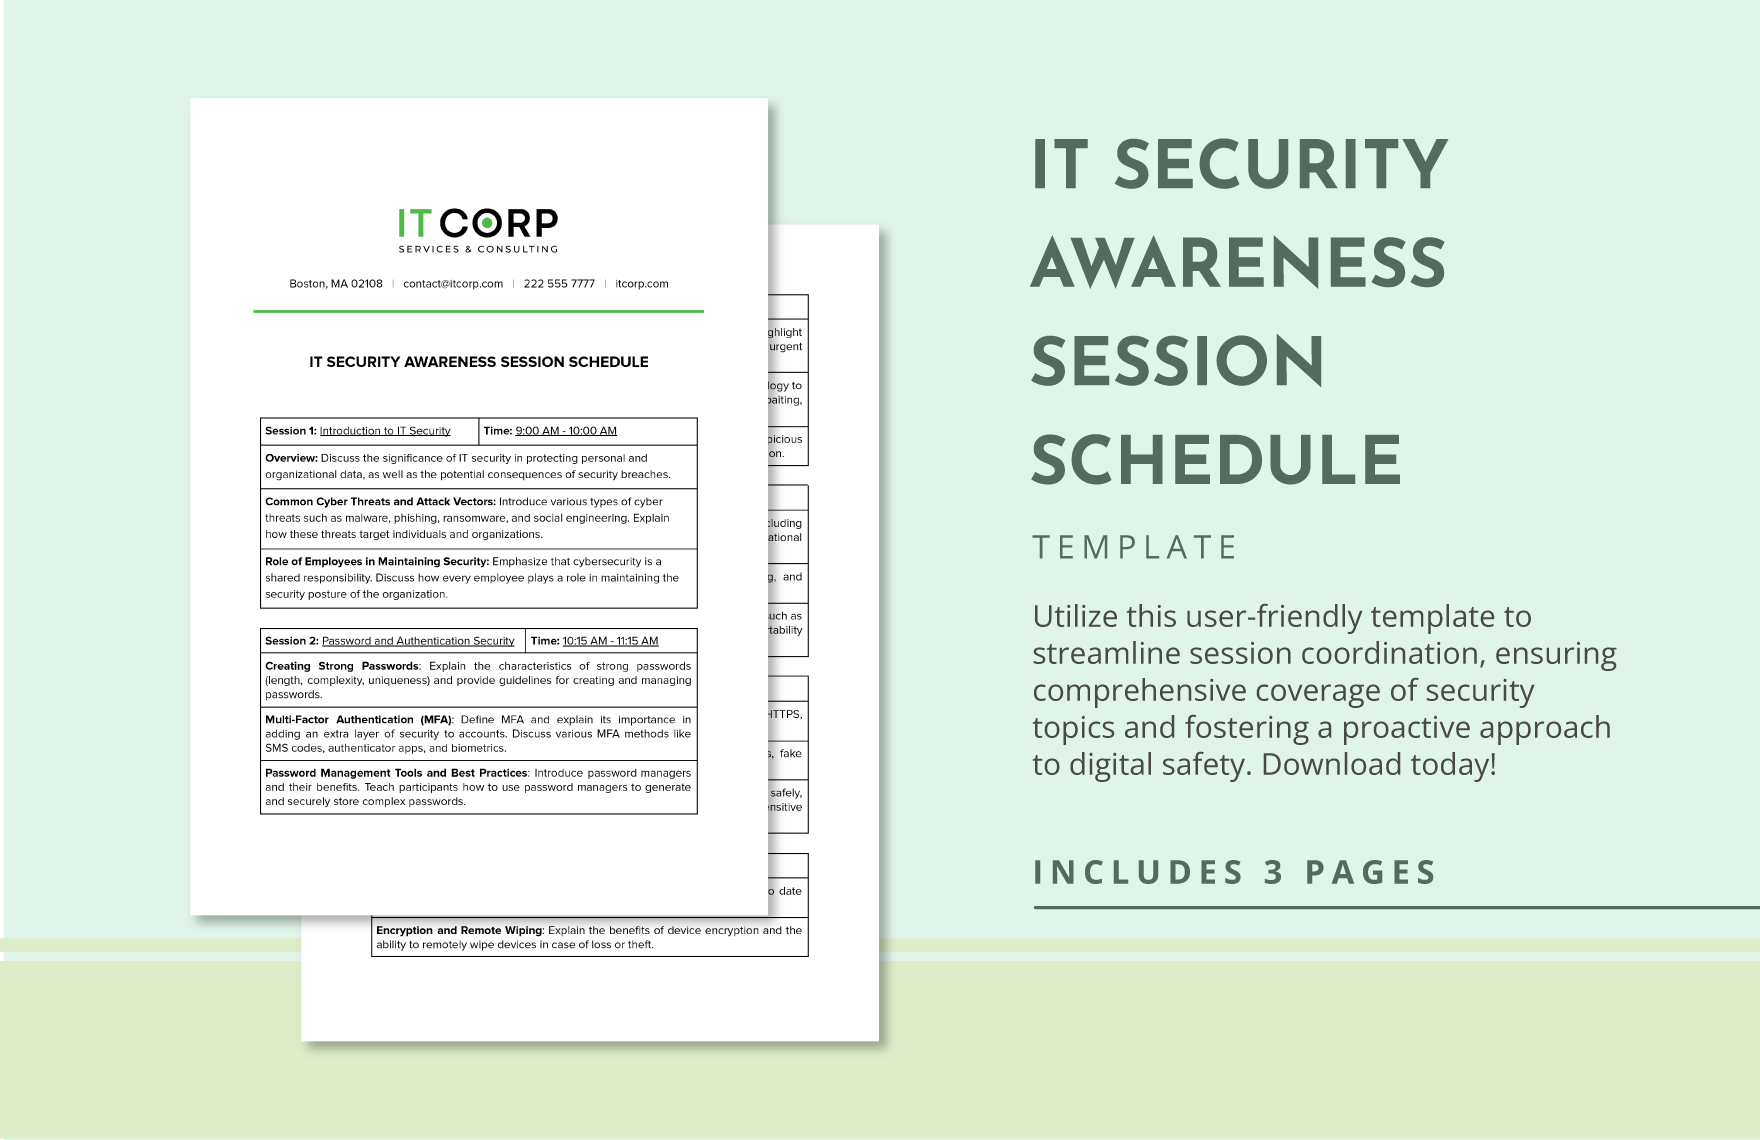 IT Security Awareness Session Schedule Template in Word, Google Docs, PDF